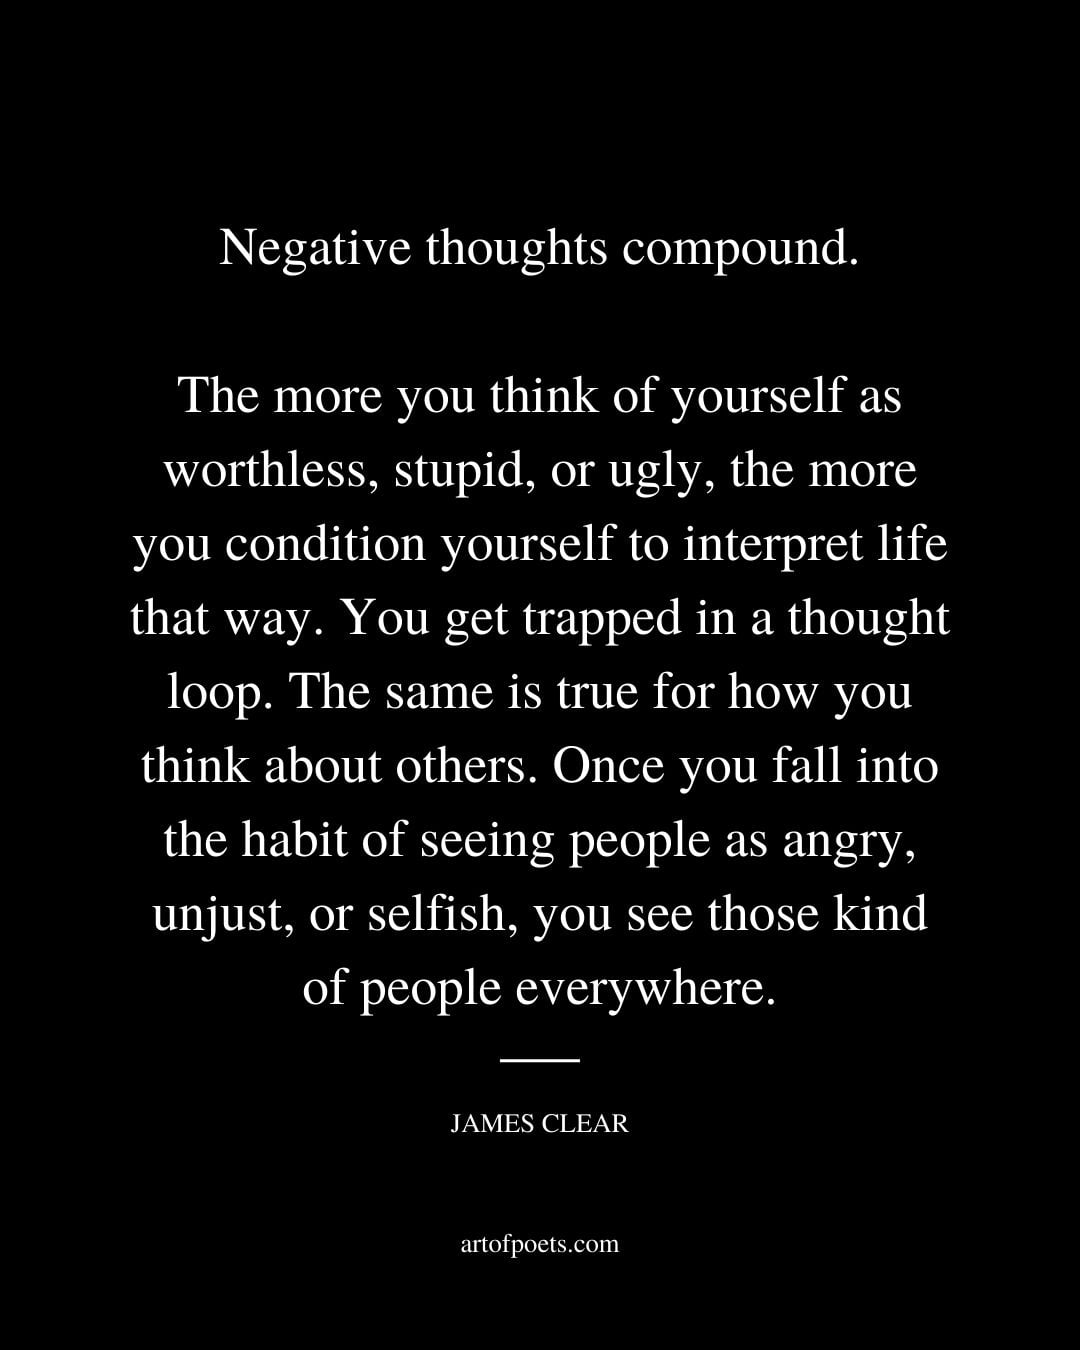 Negative thoughts compound. The more you think of yourself as worthless stupid or ugly the more you condition yourself to interpret life that way